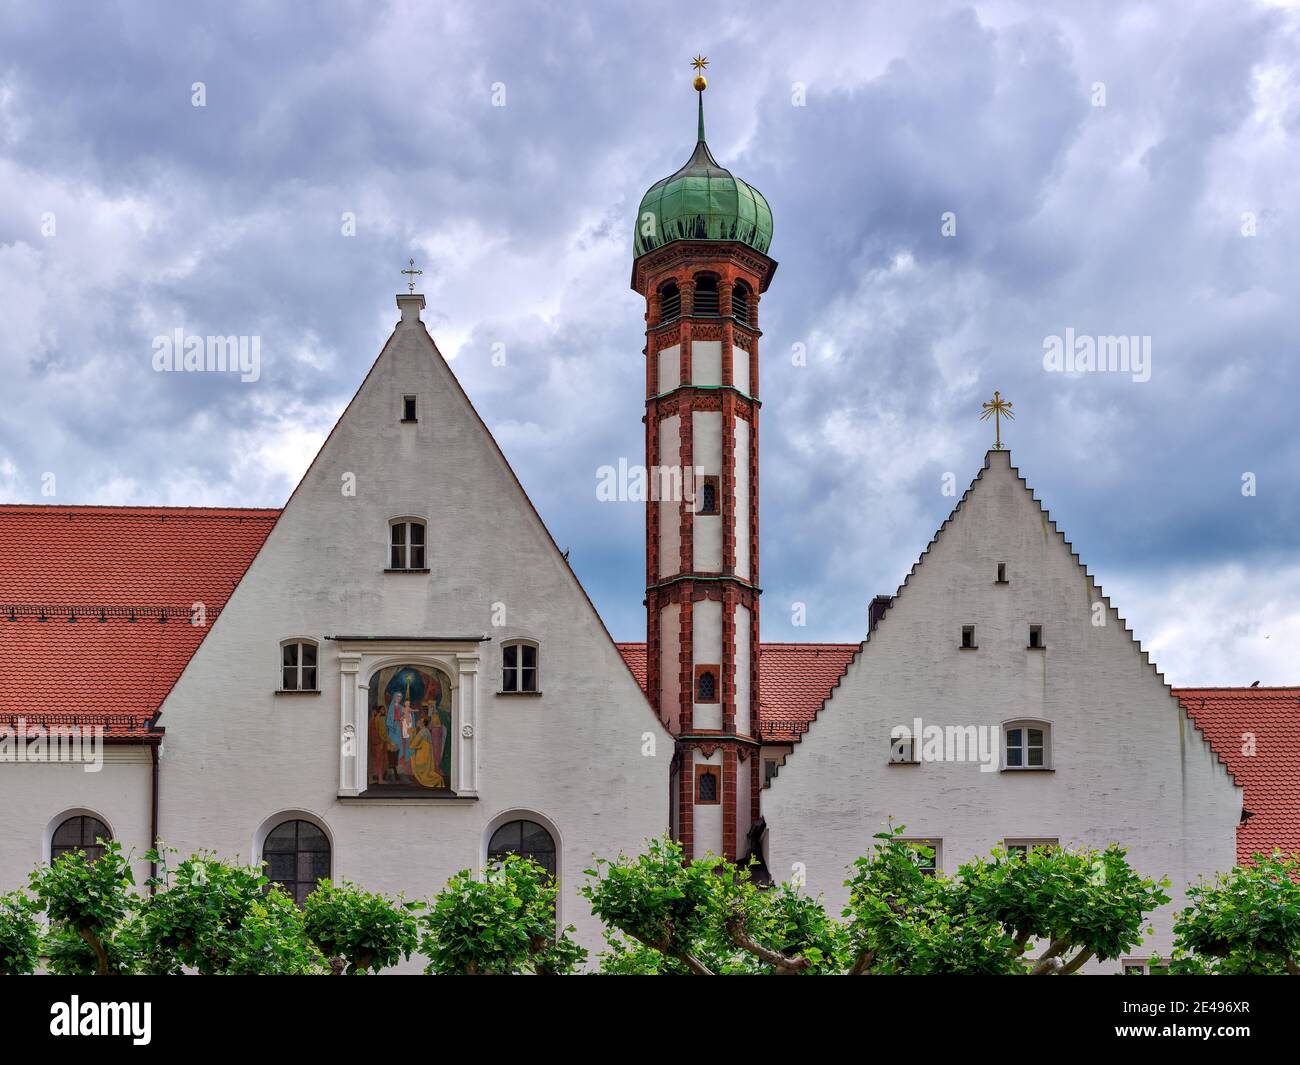 historical building, monastery, monastery building, square, plane trees, tower, steeple, historical old town, historical place of interest, old town, place of interest Stock Photo